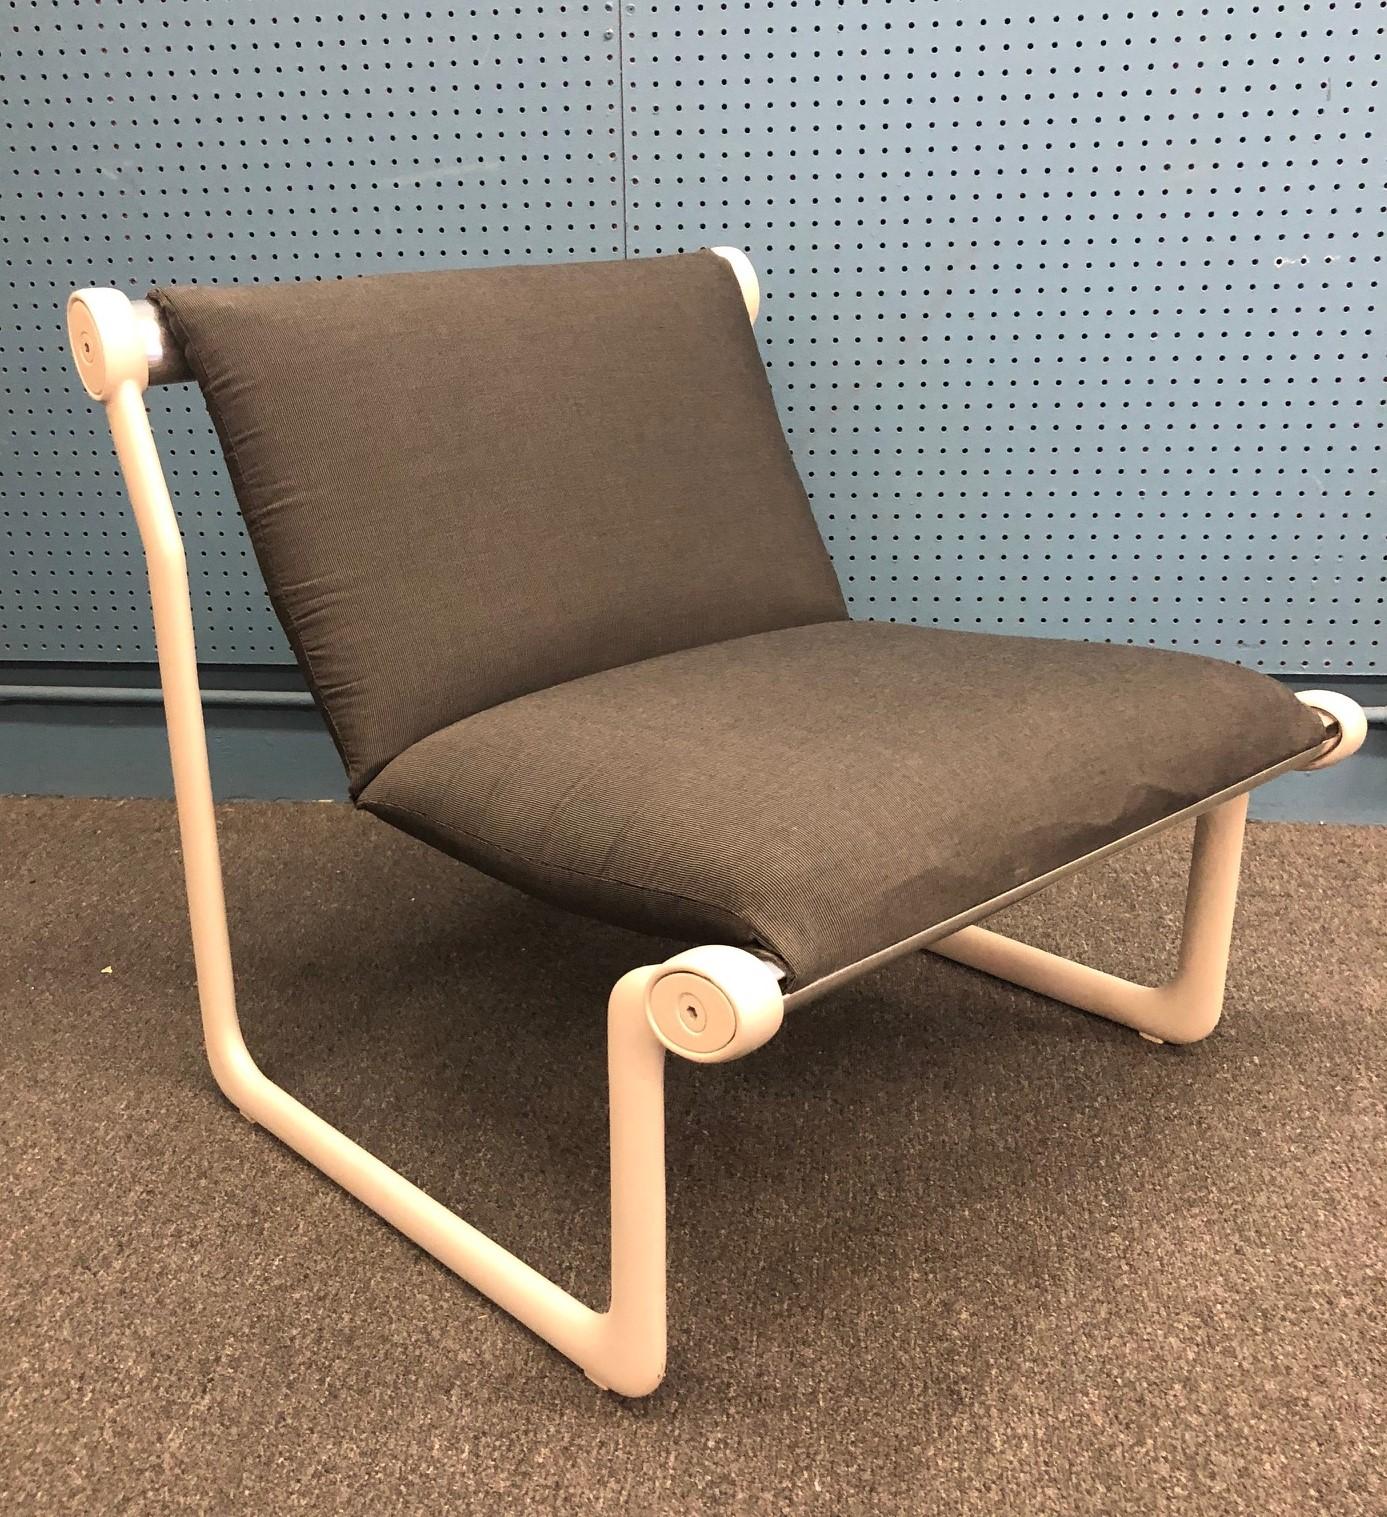 Handsome sling lounge chair designed by Hannah & Morrison for Knoll International, Inc., circa 1980. The chair was designed by the collaboration of Pratt Institute alumnus Bruce Hannah and Andrew Morrison for Knoll International, where they were